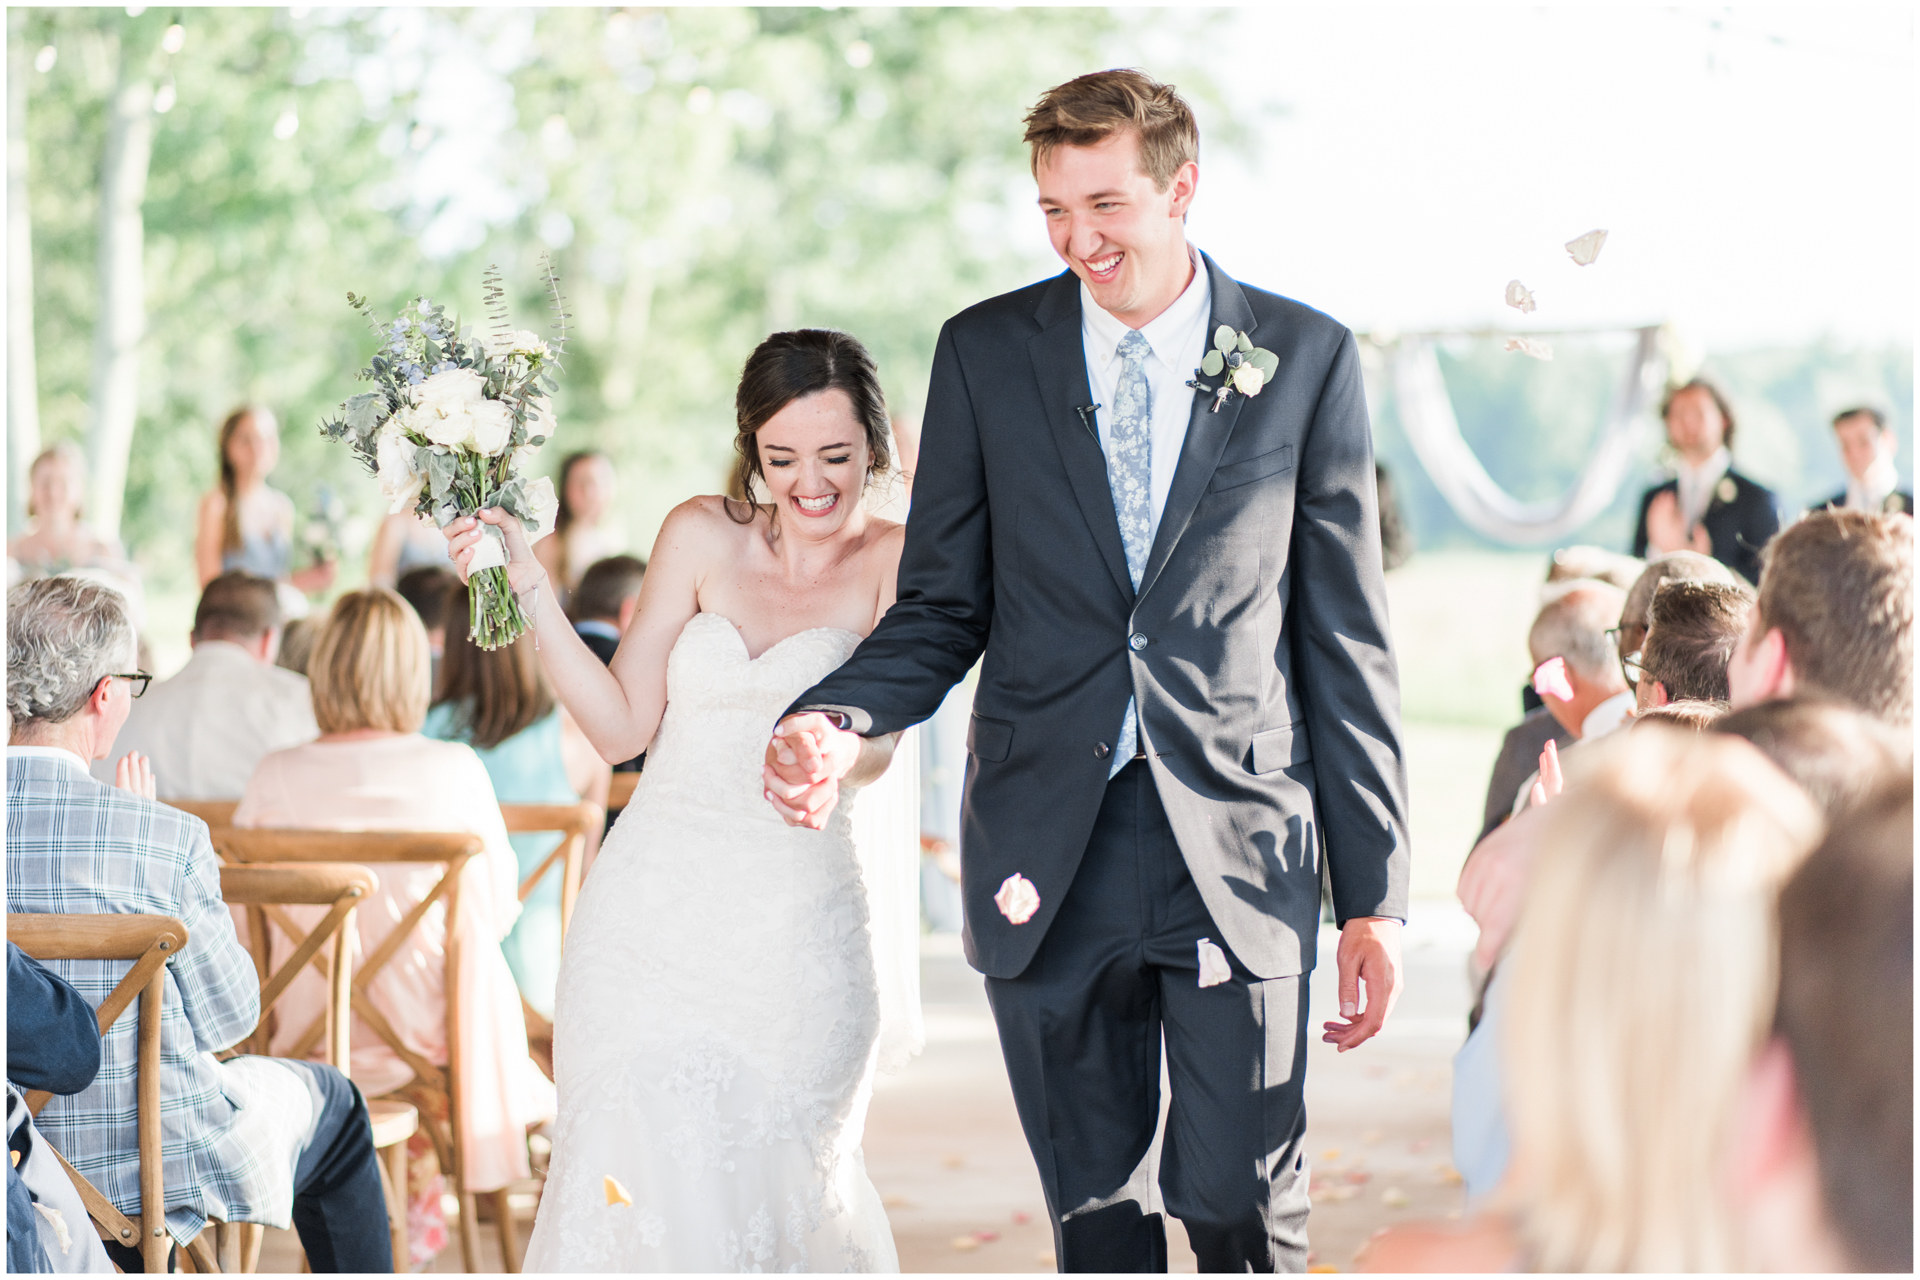 Outdoor Ceremony at Harvest Hollow - Guest tosses flower petals while bride and groom walk down the aisle